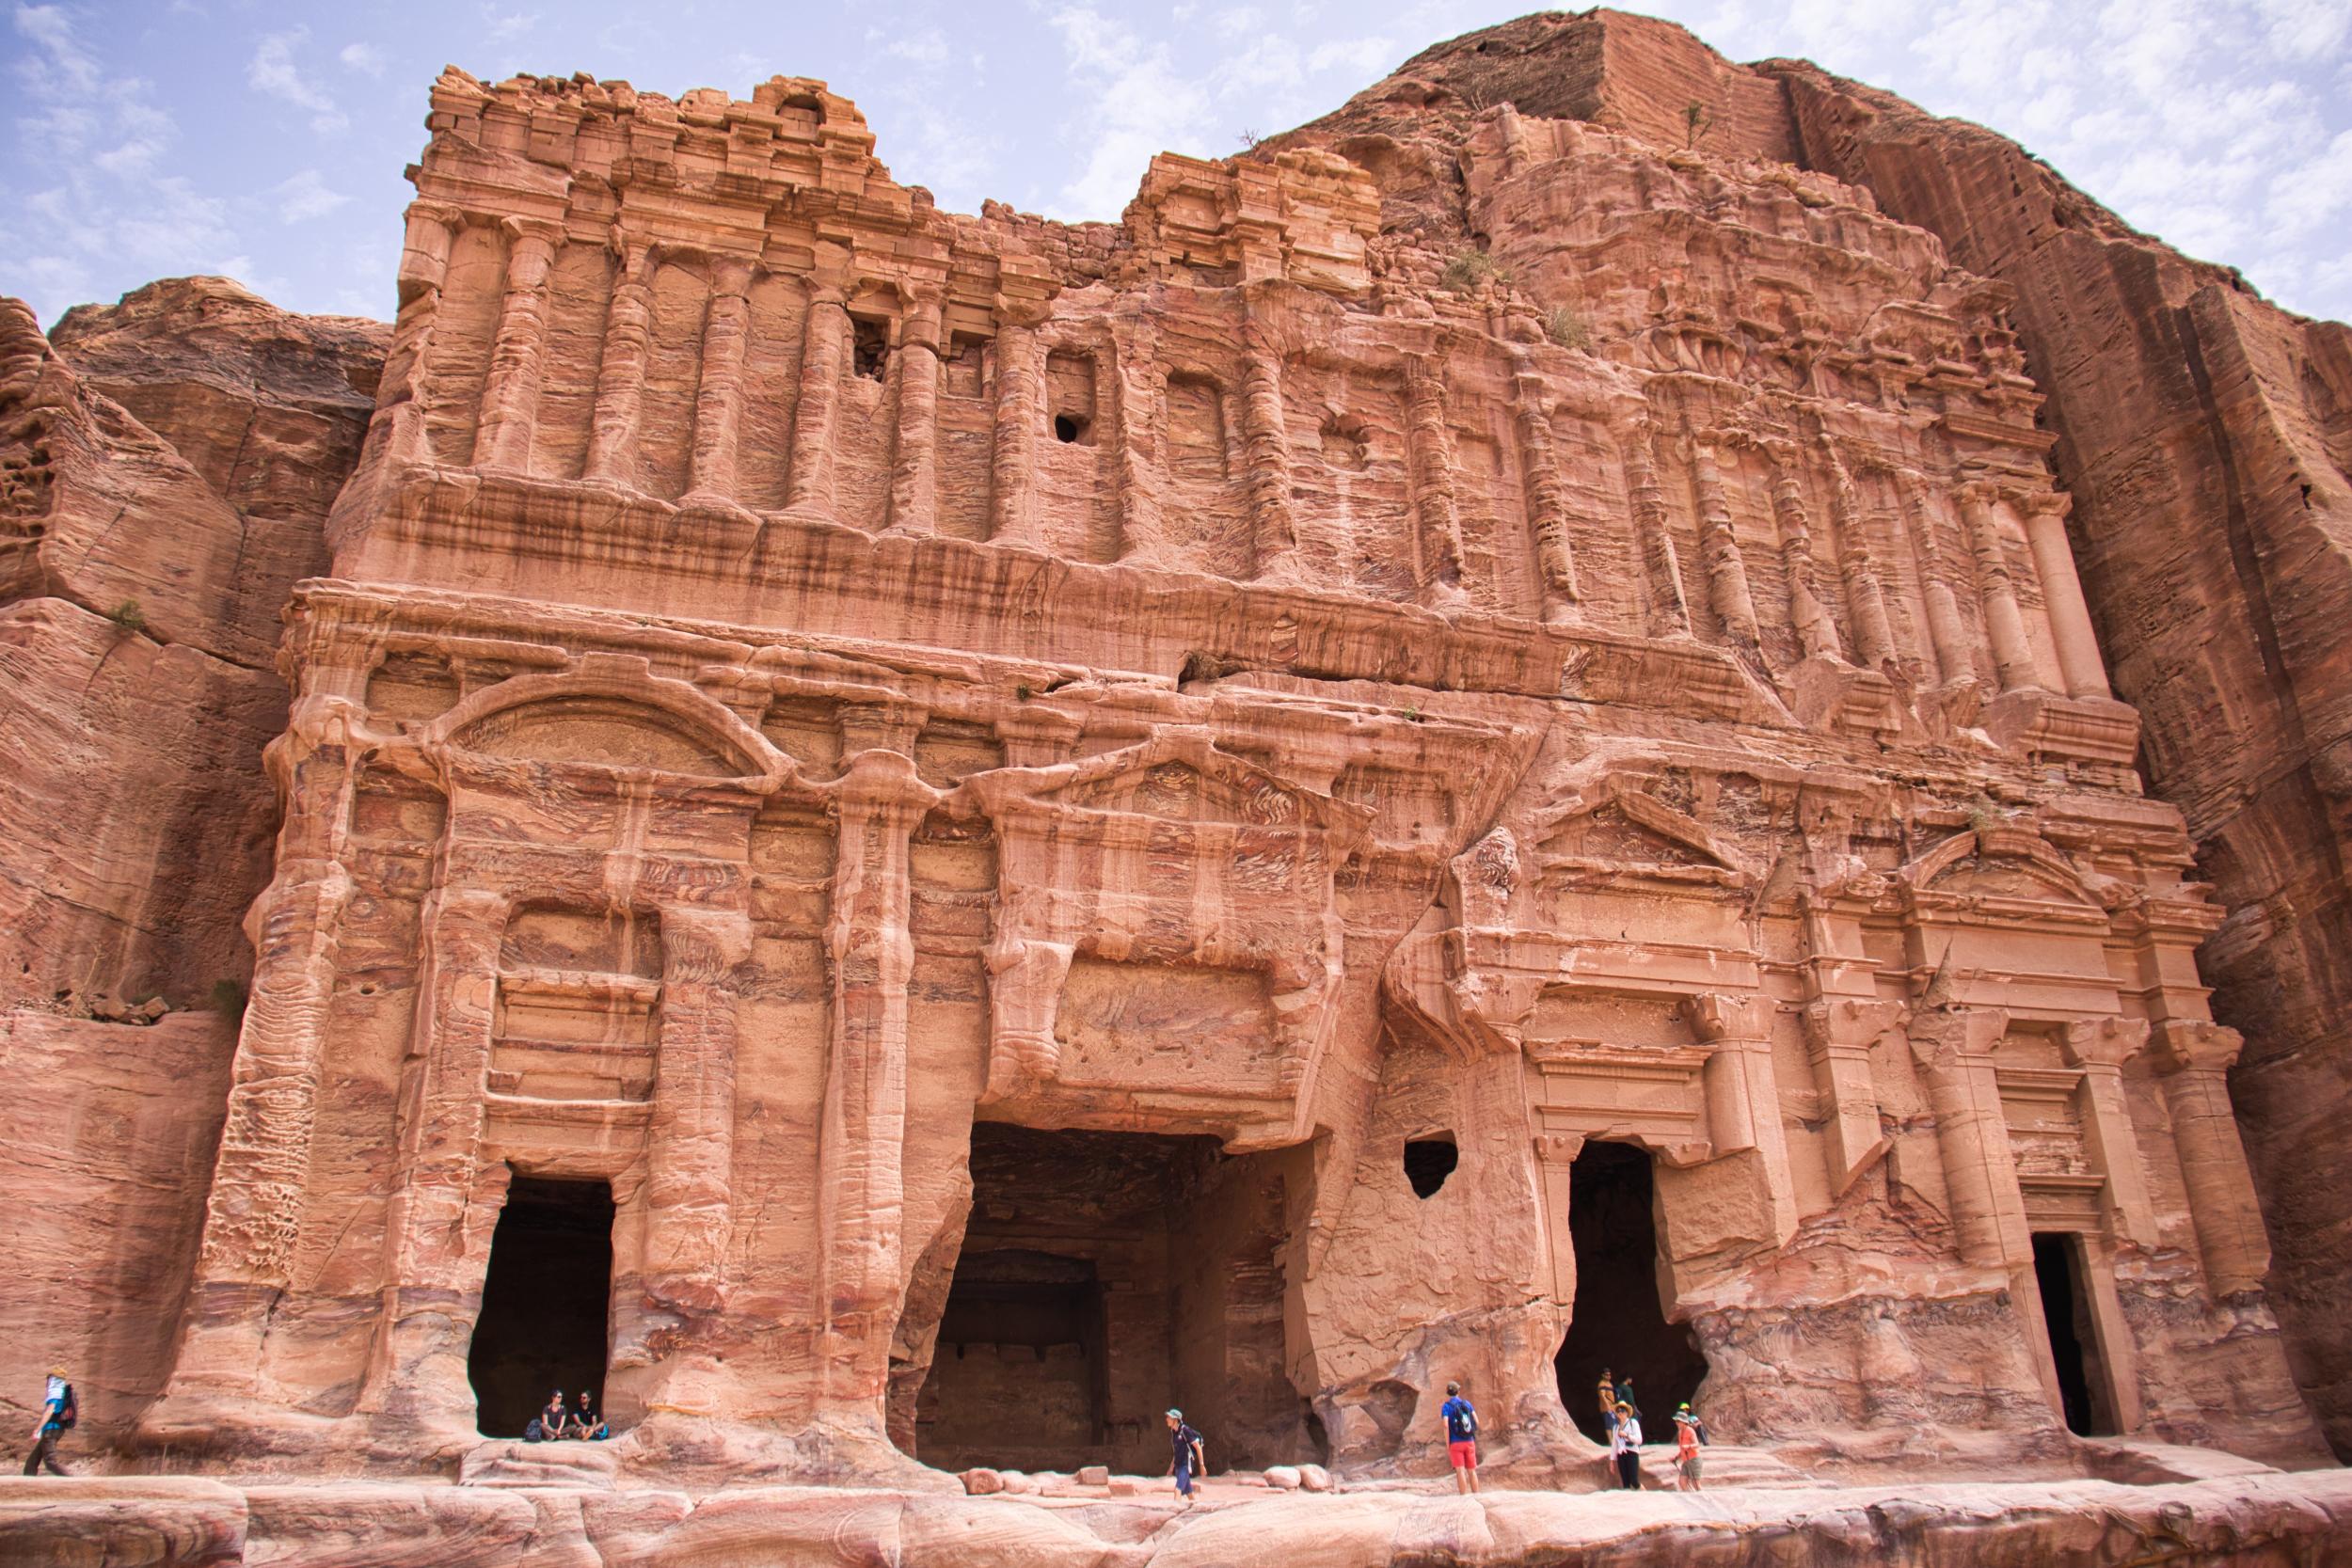 Petra has plenty of famous buildings and temples